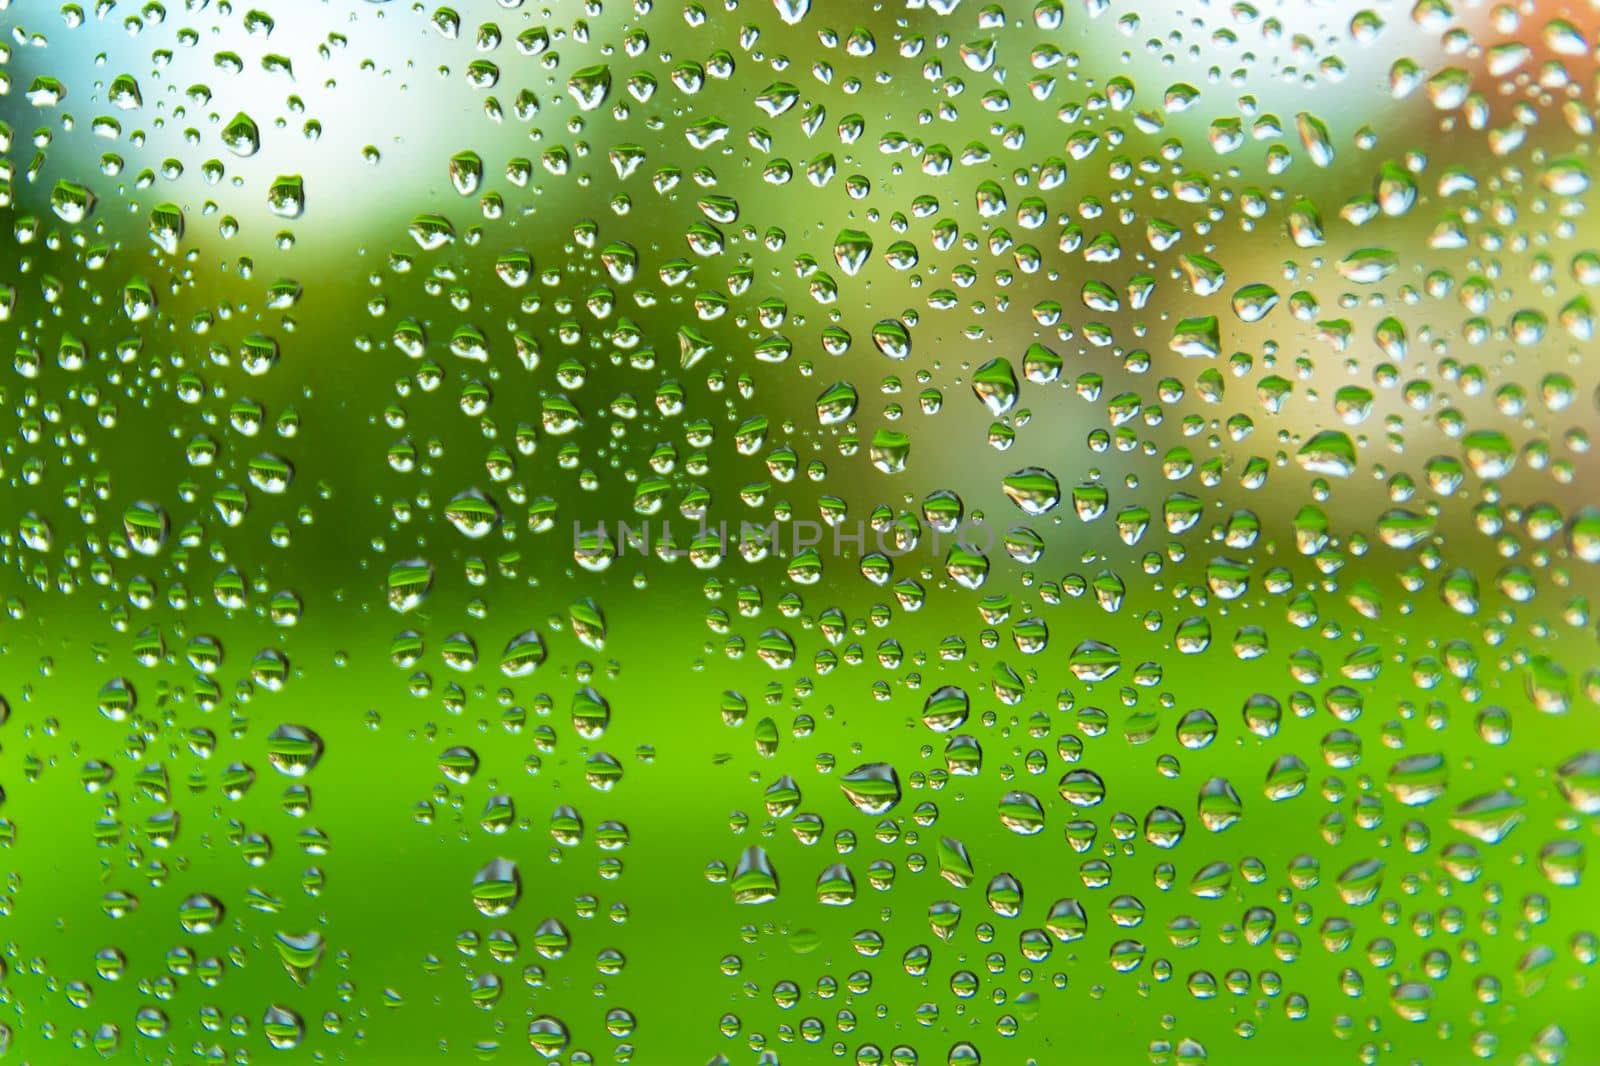 Many raindrops on the window glass on a green outdoor background